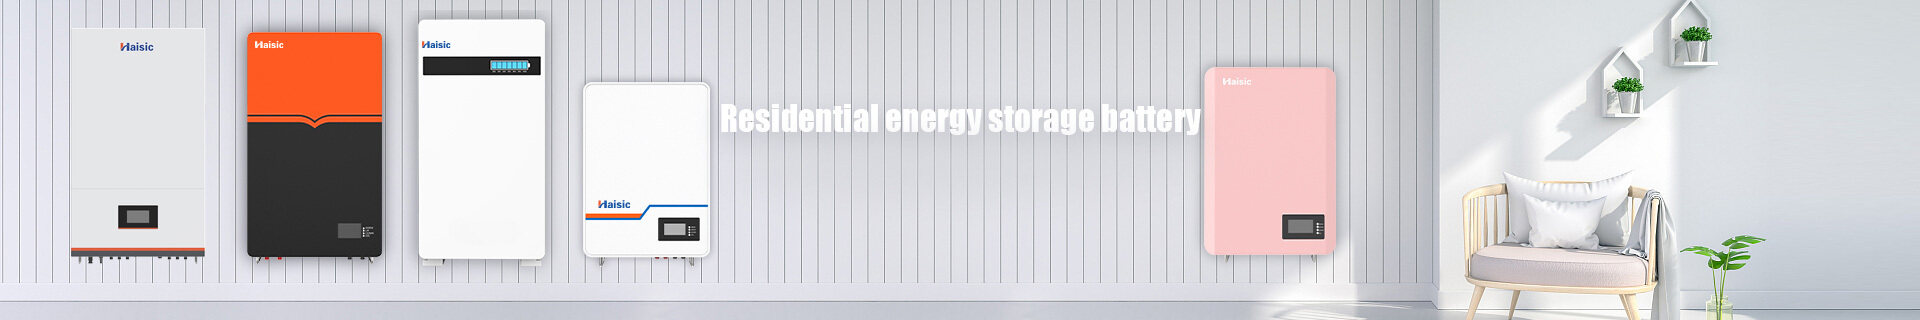 48V 100ah lifepo4 battery,powerwall battery,energy storage battery,wall-mounted battery